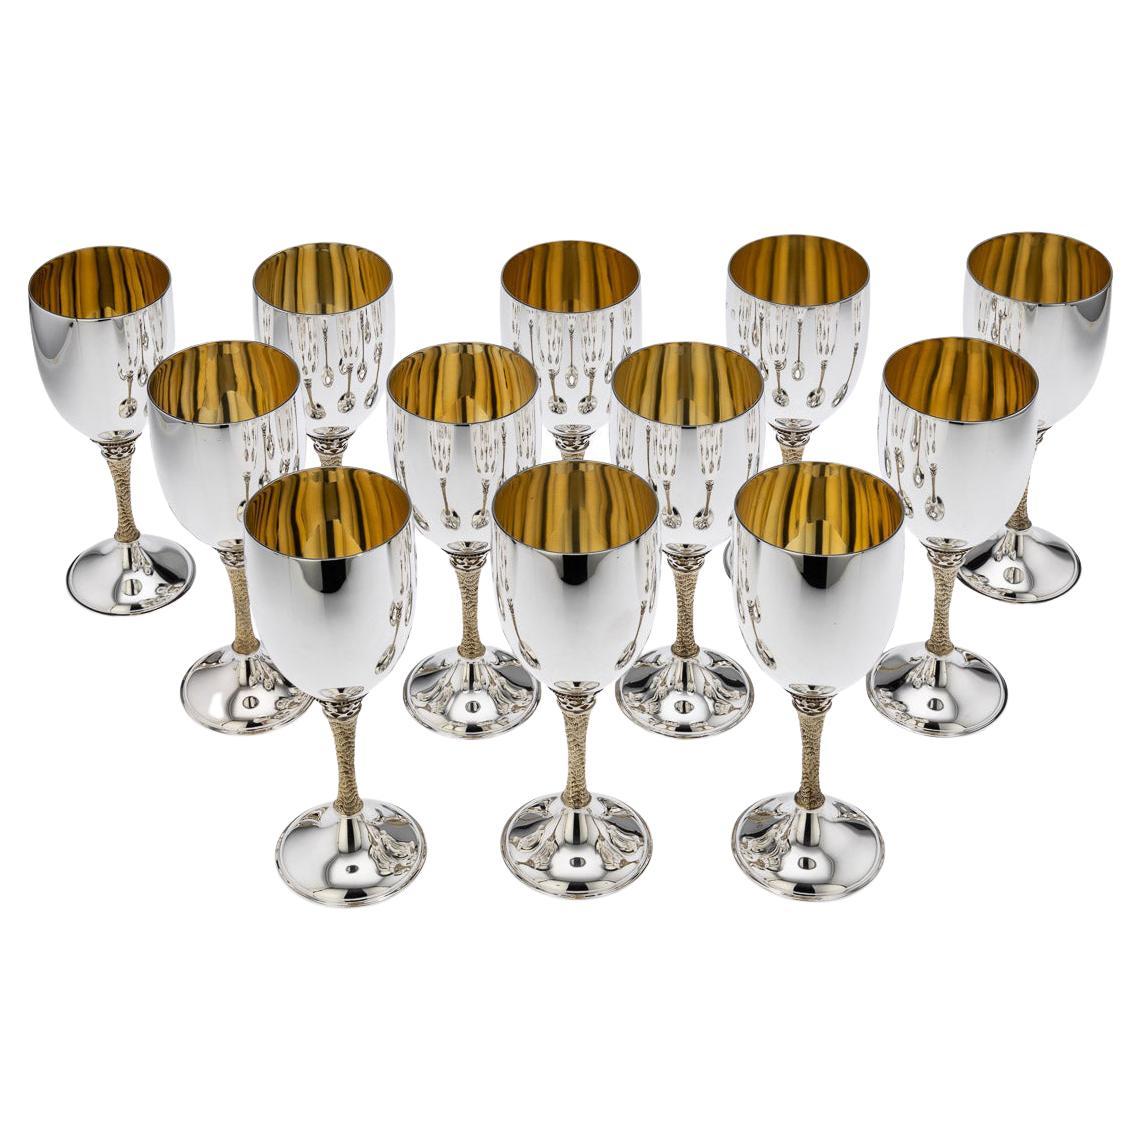 20th Century Garrard & Co Solid Silver Set of 12 Goblets, Anthony Elson, c.1977